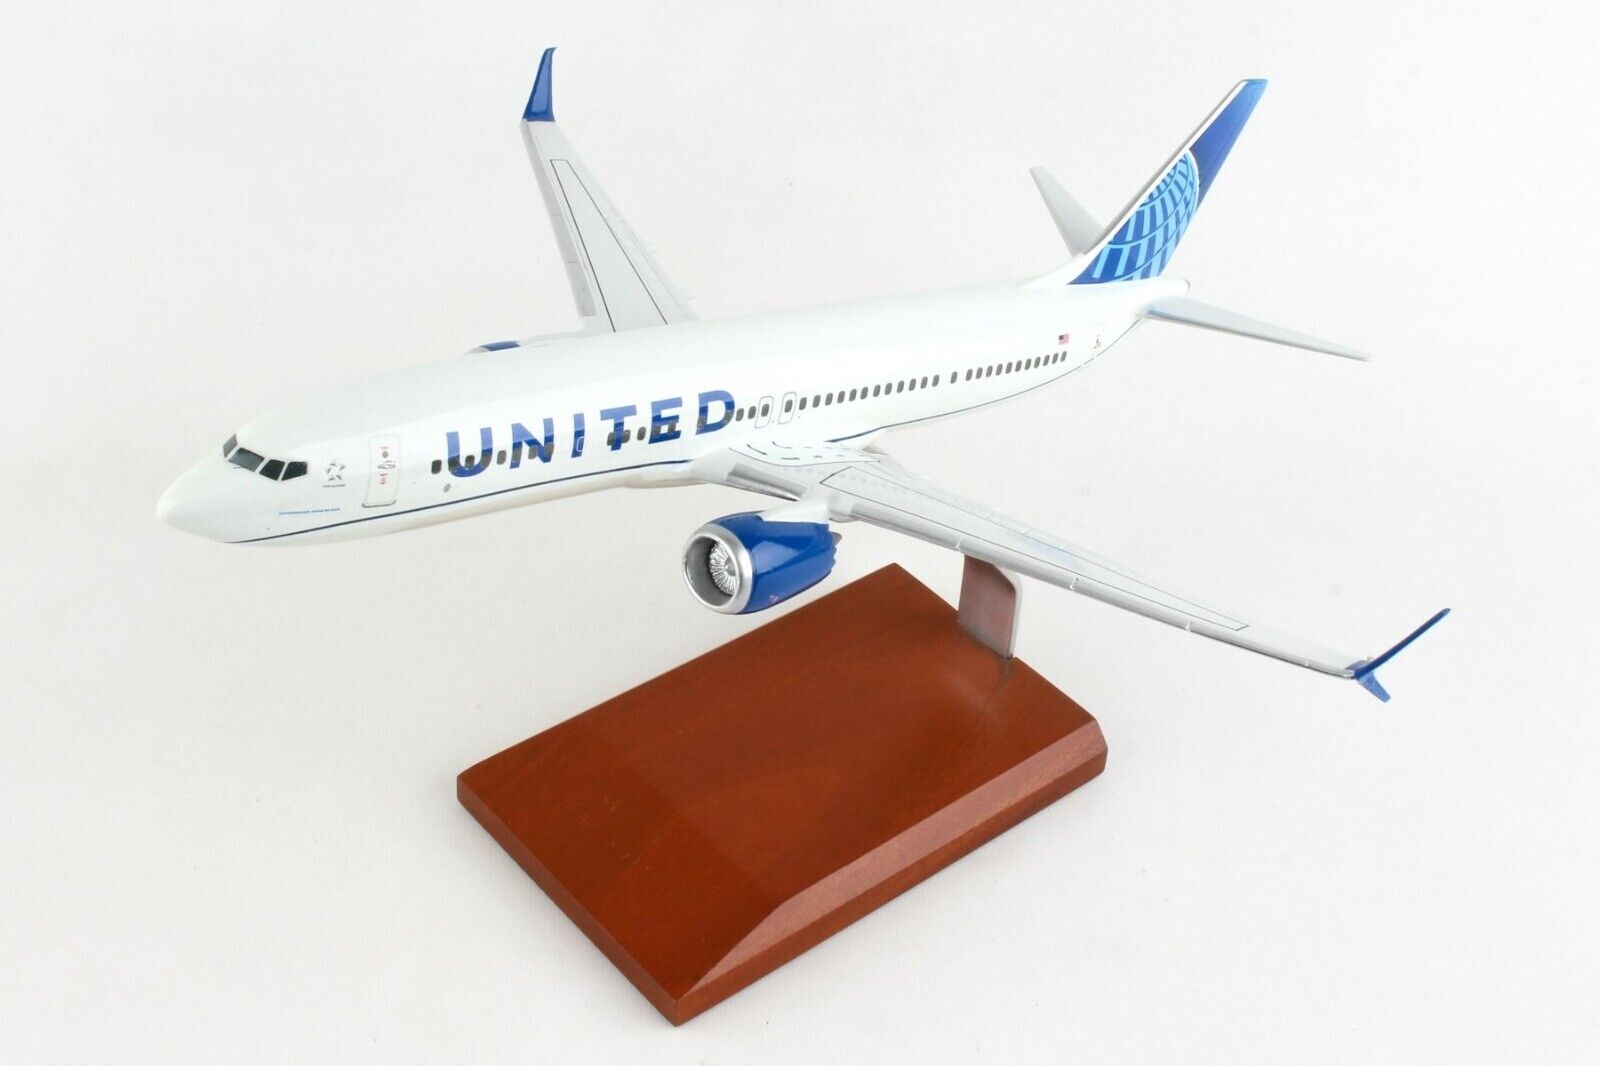 United Airlines Boeing 737-800 New Livery Desk Display Model 1/100 ES Airplane